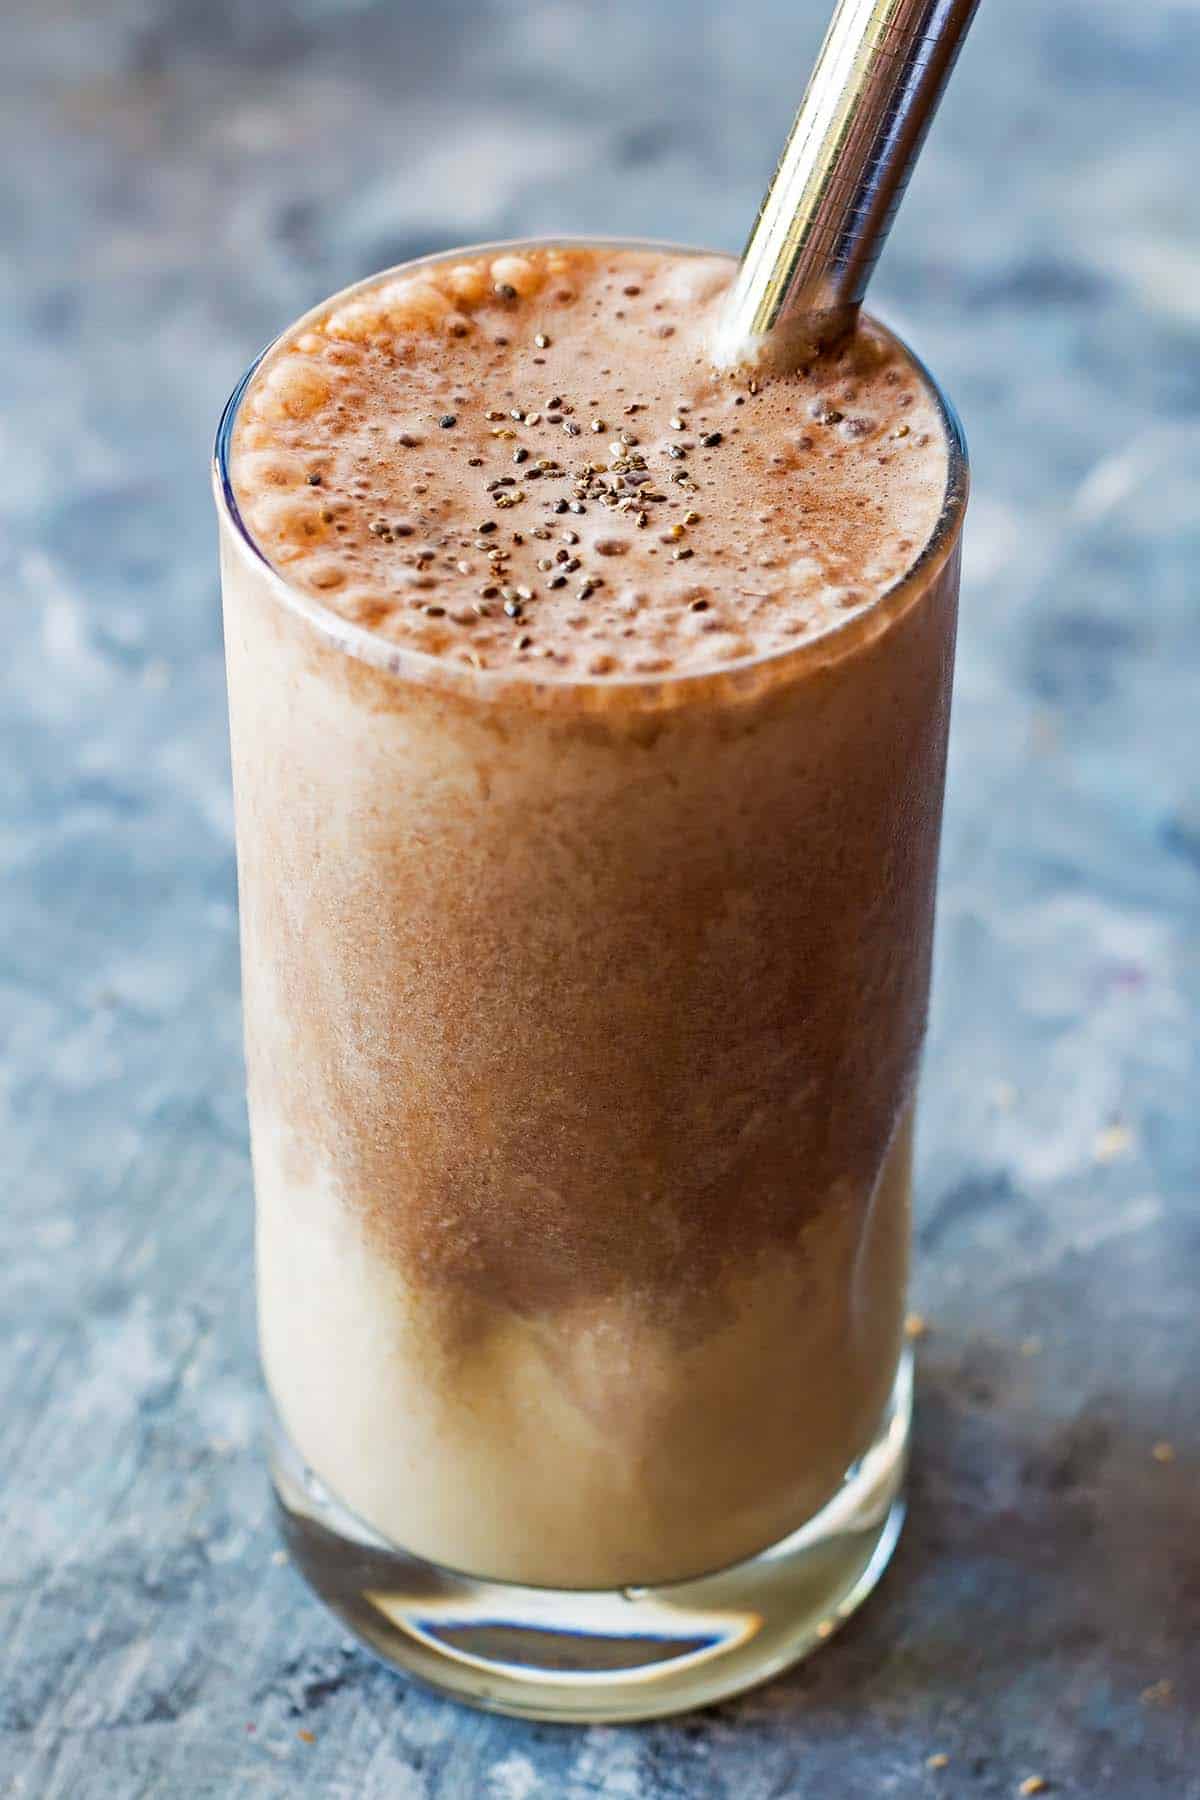 two layers smoothie in a glass, peanut butter smoothie on the bottom and chocolate on top